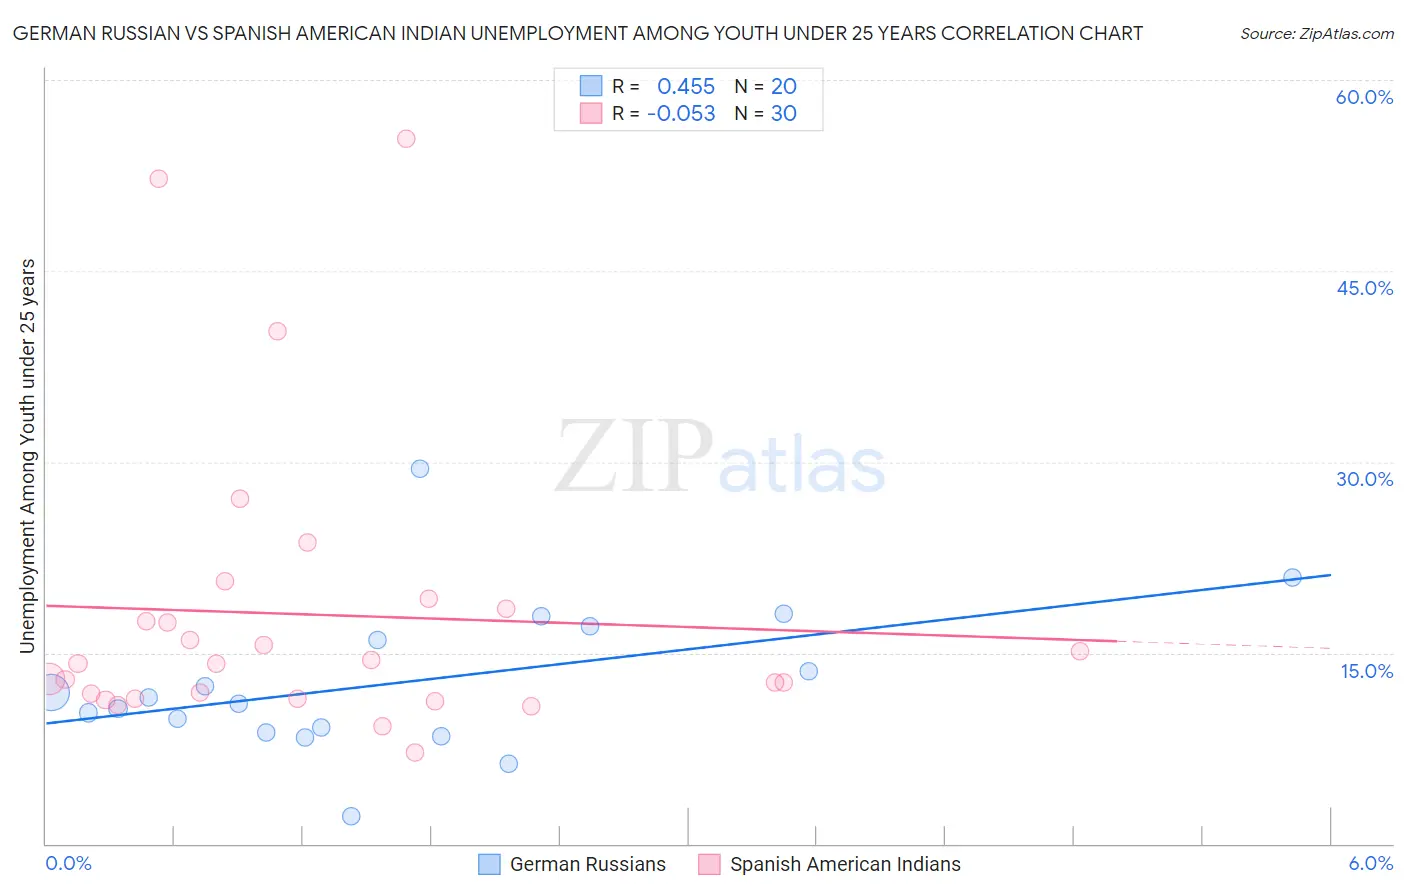 German Russian vs Spanish American Indian Unemployment Among Youth under 25 years